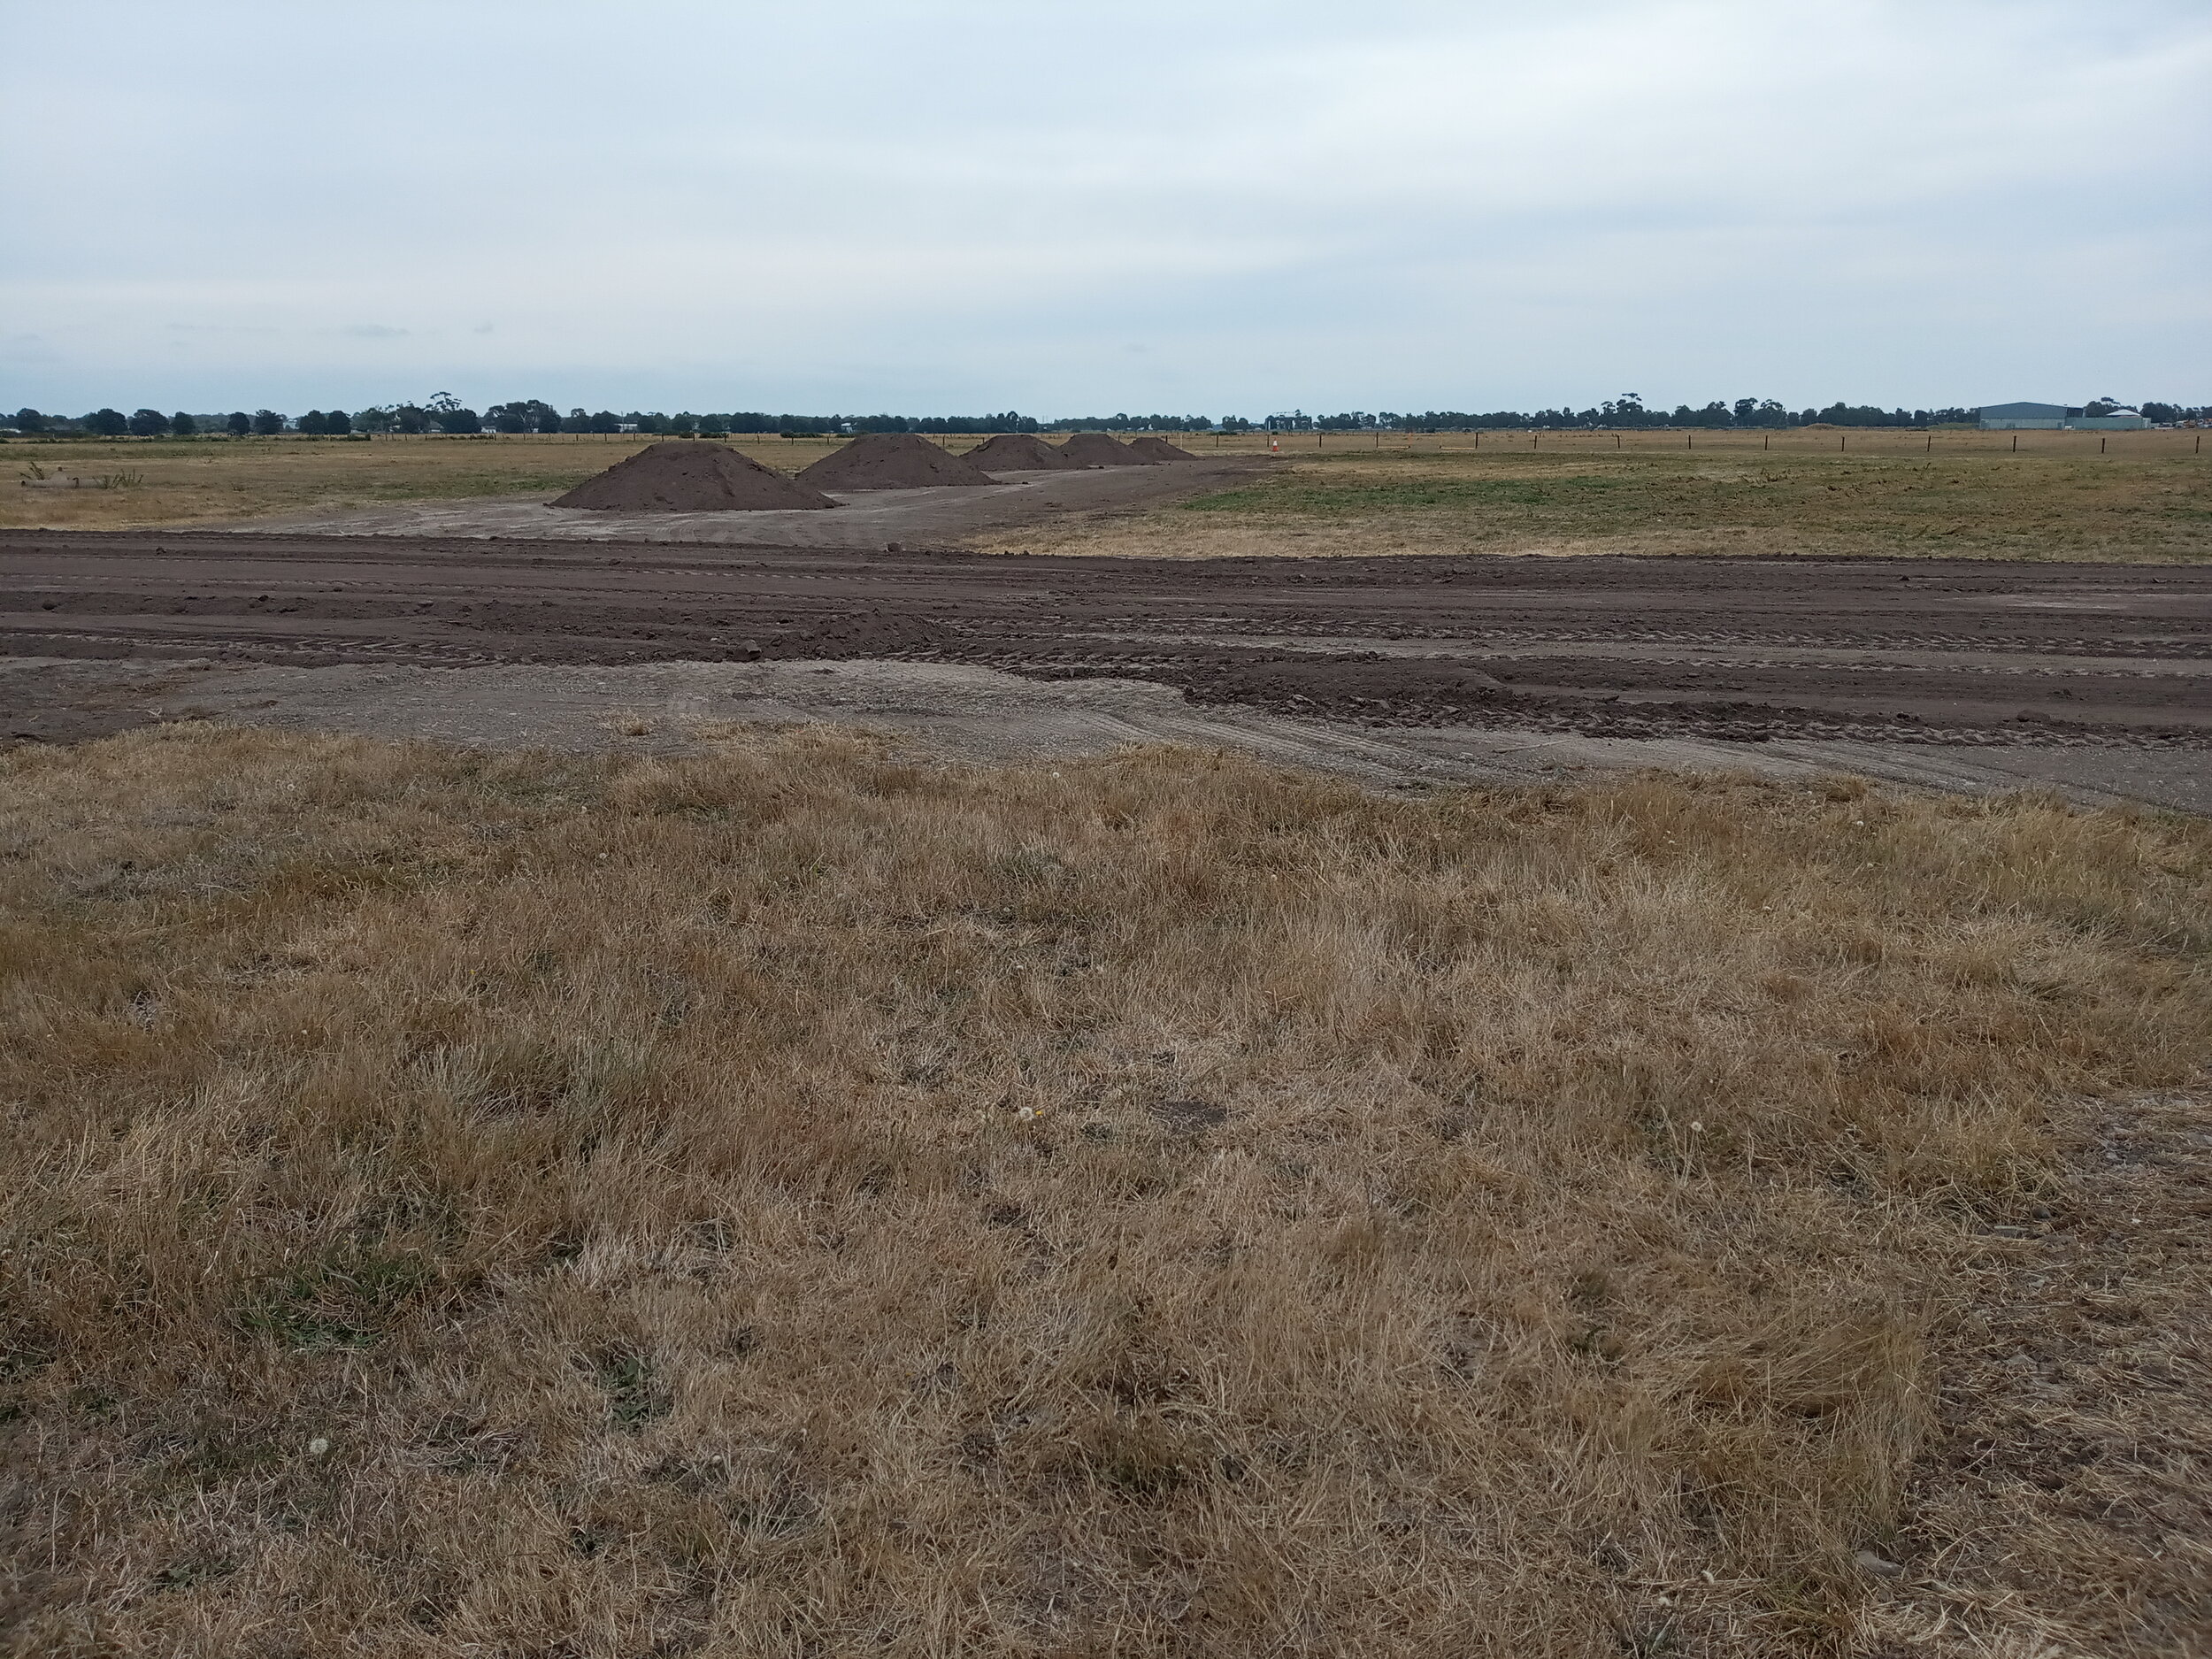  27/2  New topsoil laid over the runways  